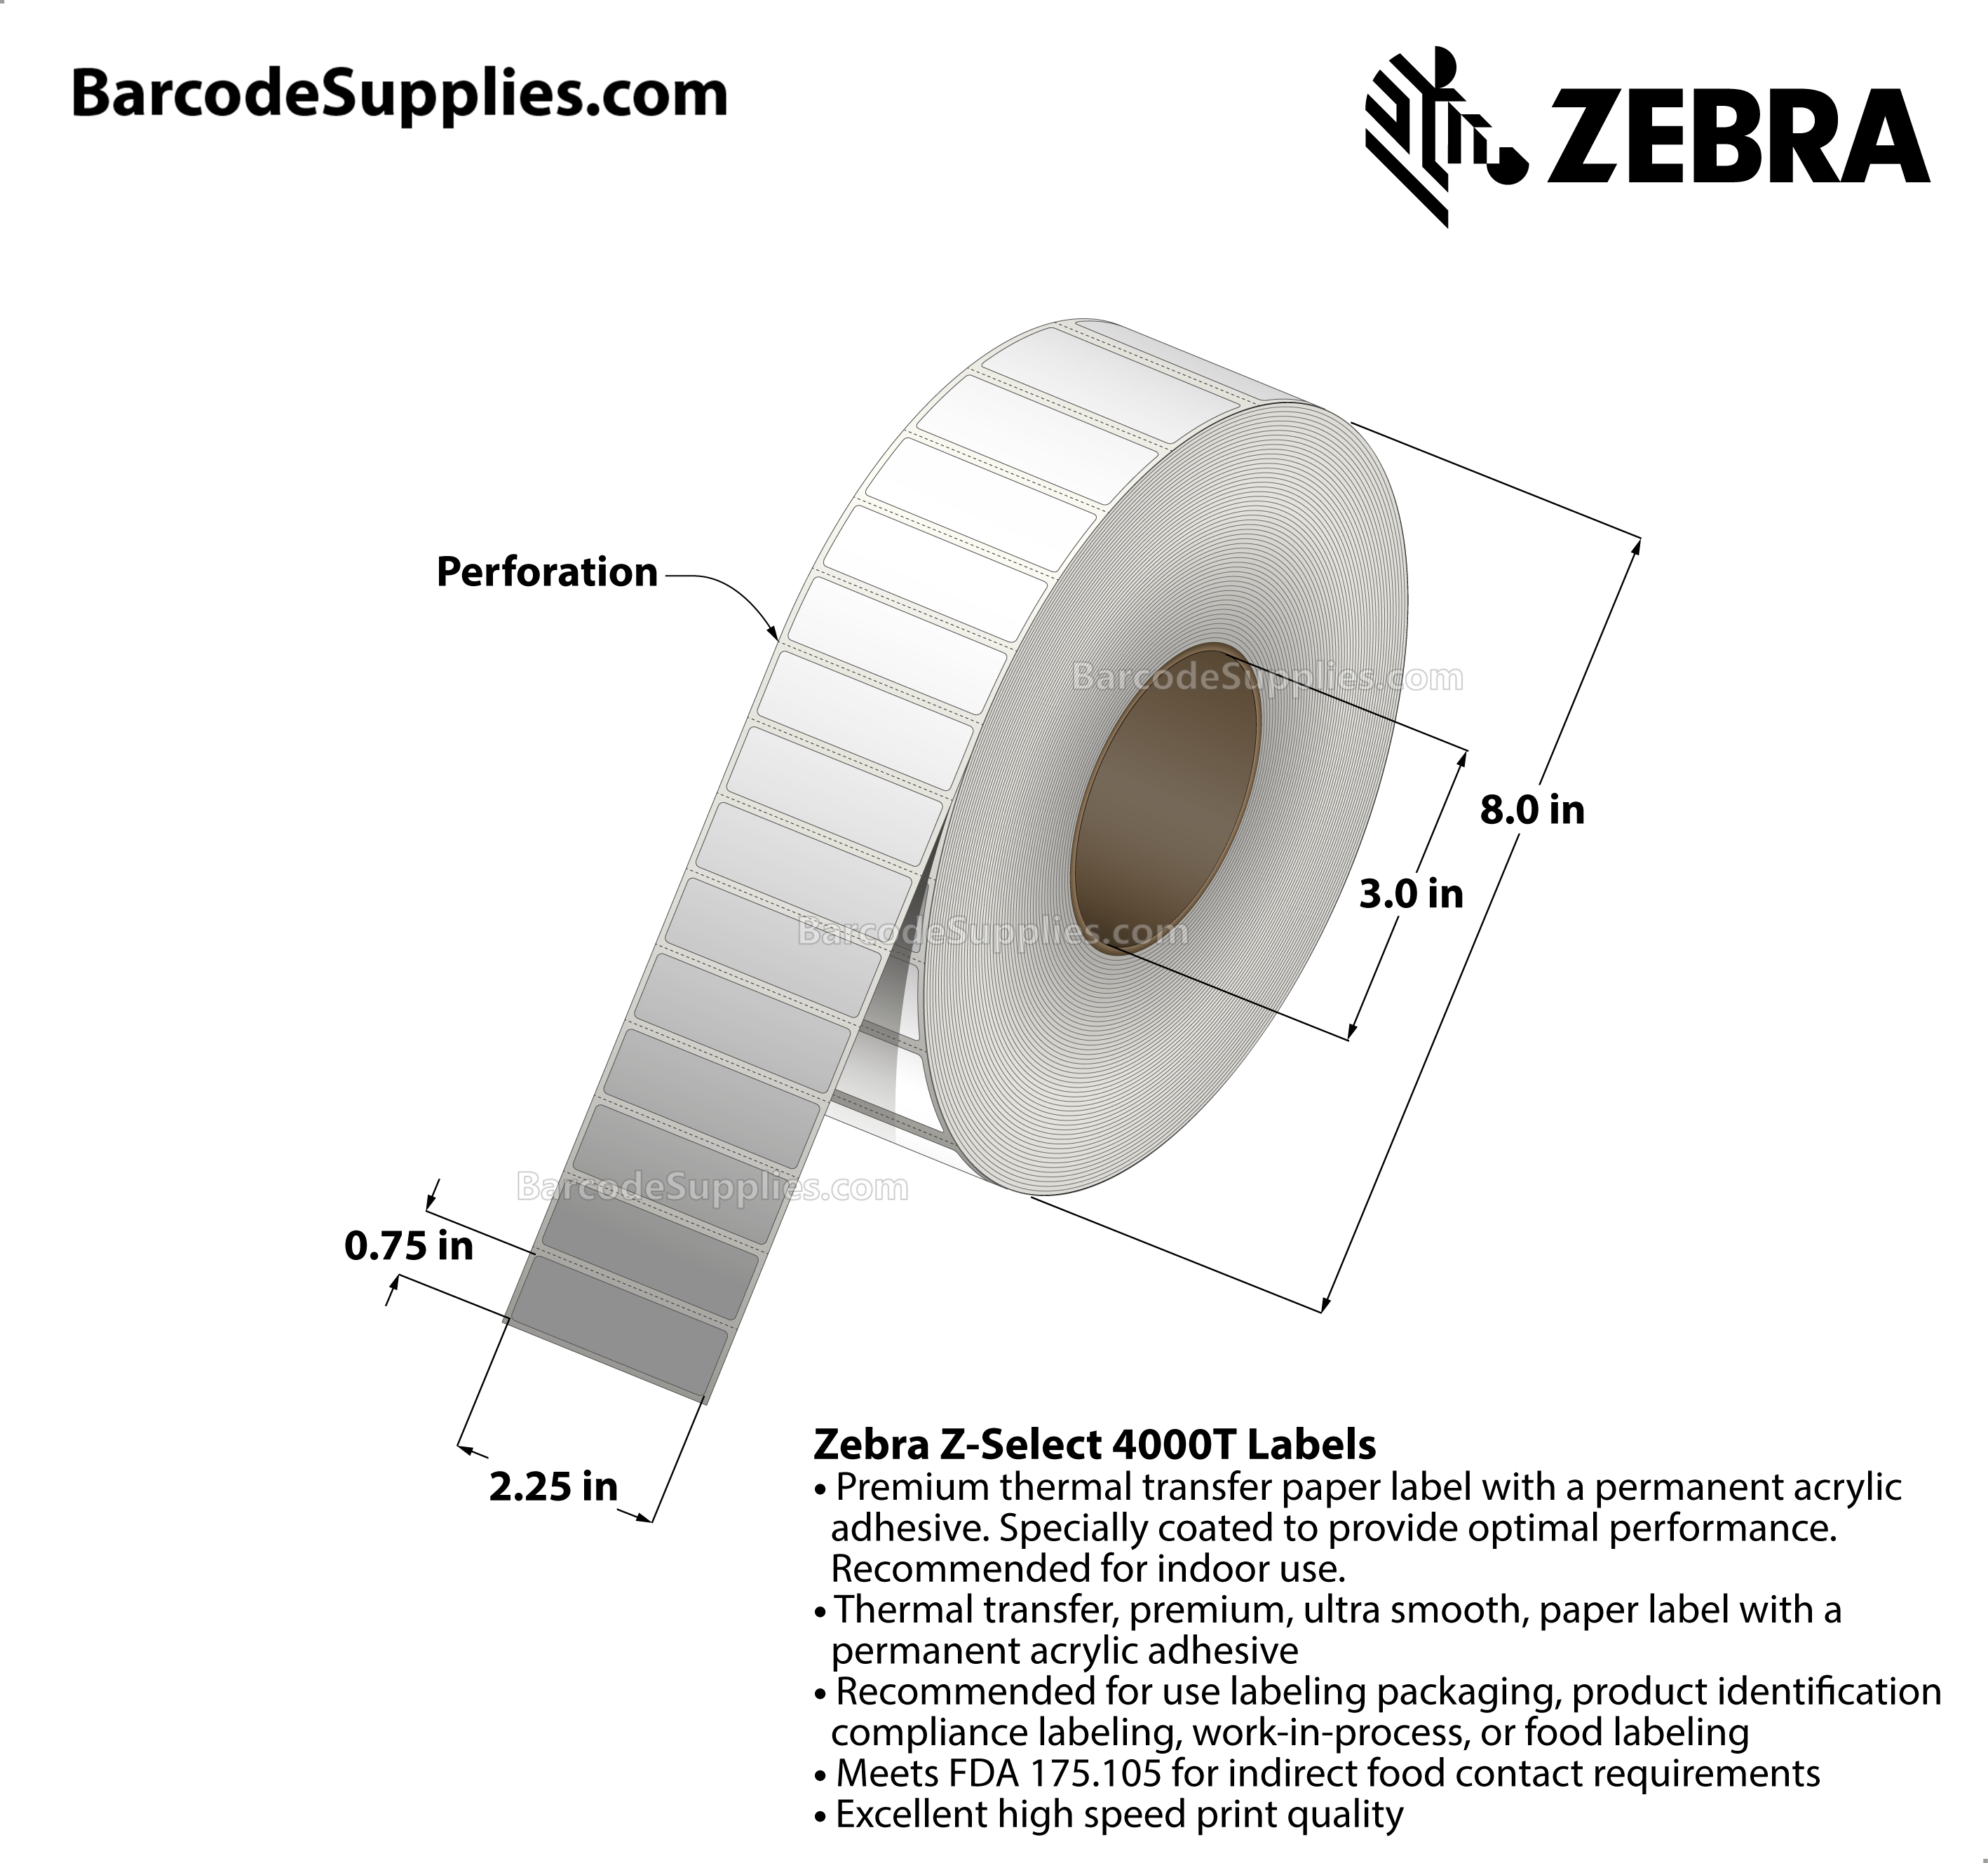 2.25 x 0.75 Thermal Transfer White Z-Select 4000T Labels With Permanent Adhesive - Perforated - 7995 Labels Per Roll - Carton Of 4 Rolls - 31980 Labels Total - MPN: 800622-075